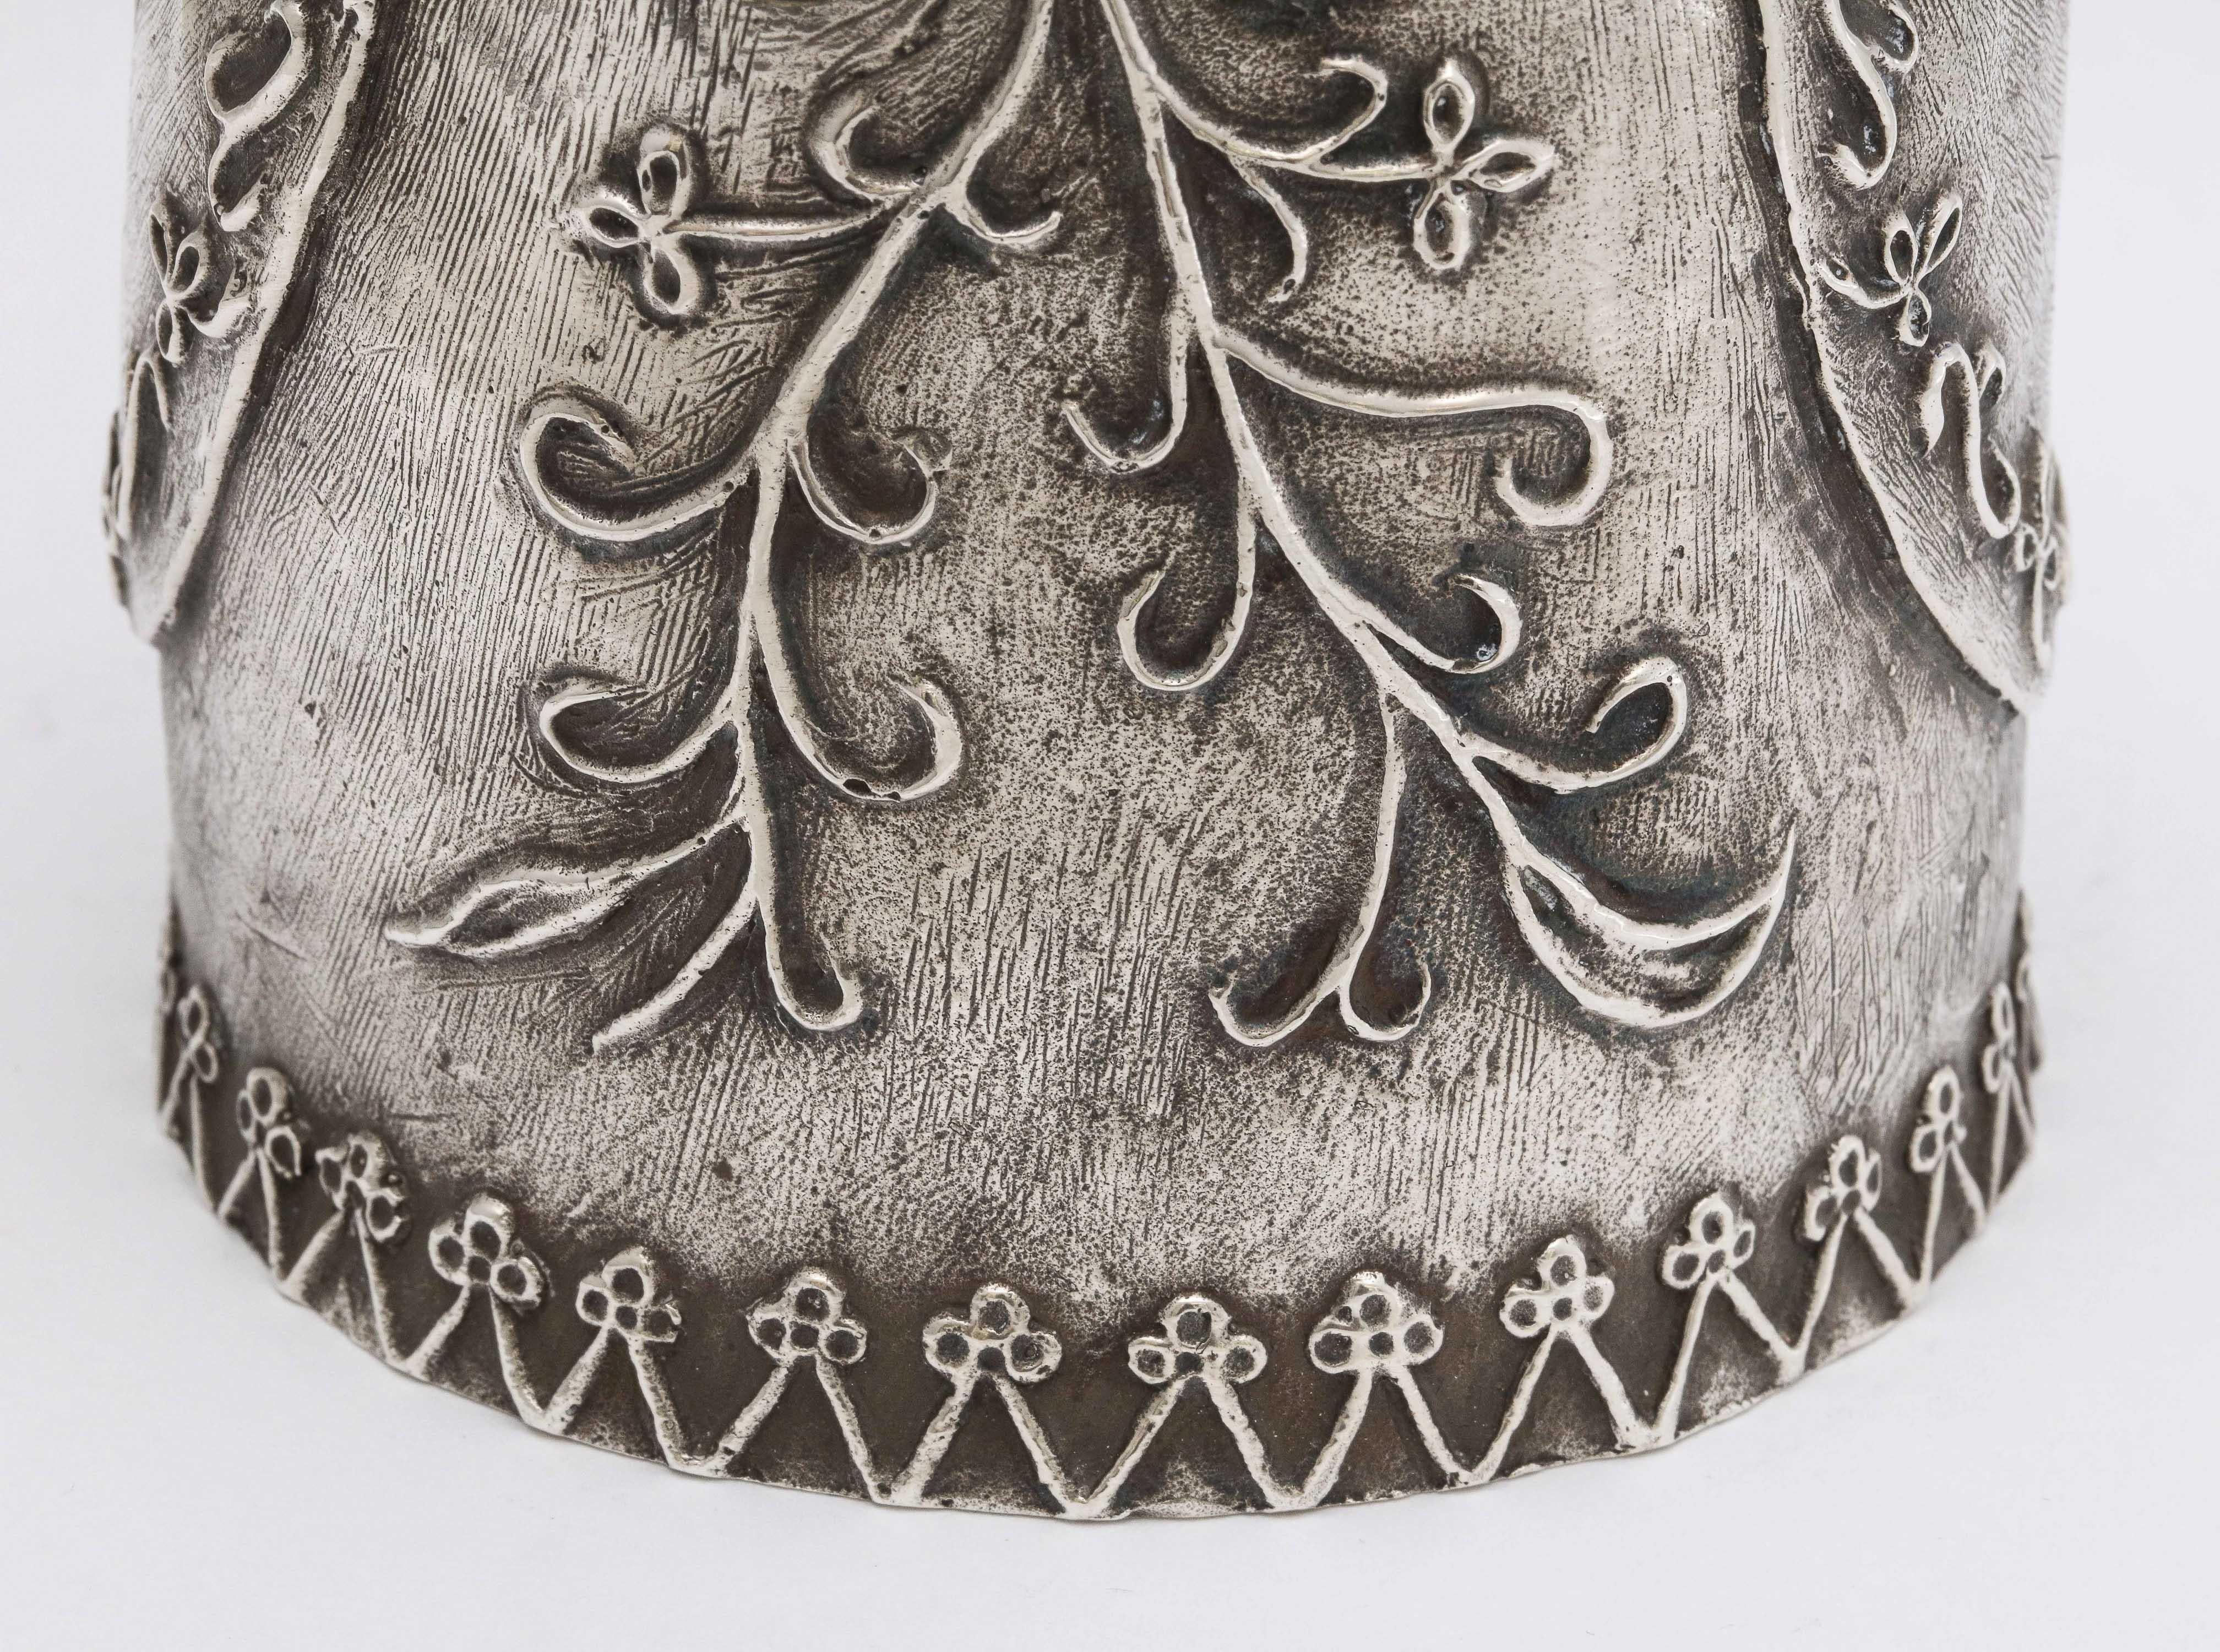 Large 17th Century-Style Sterling Silver Wager/Marriage Cup 9